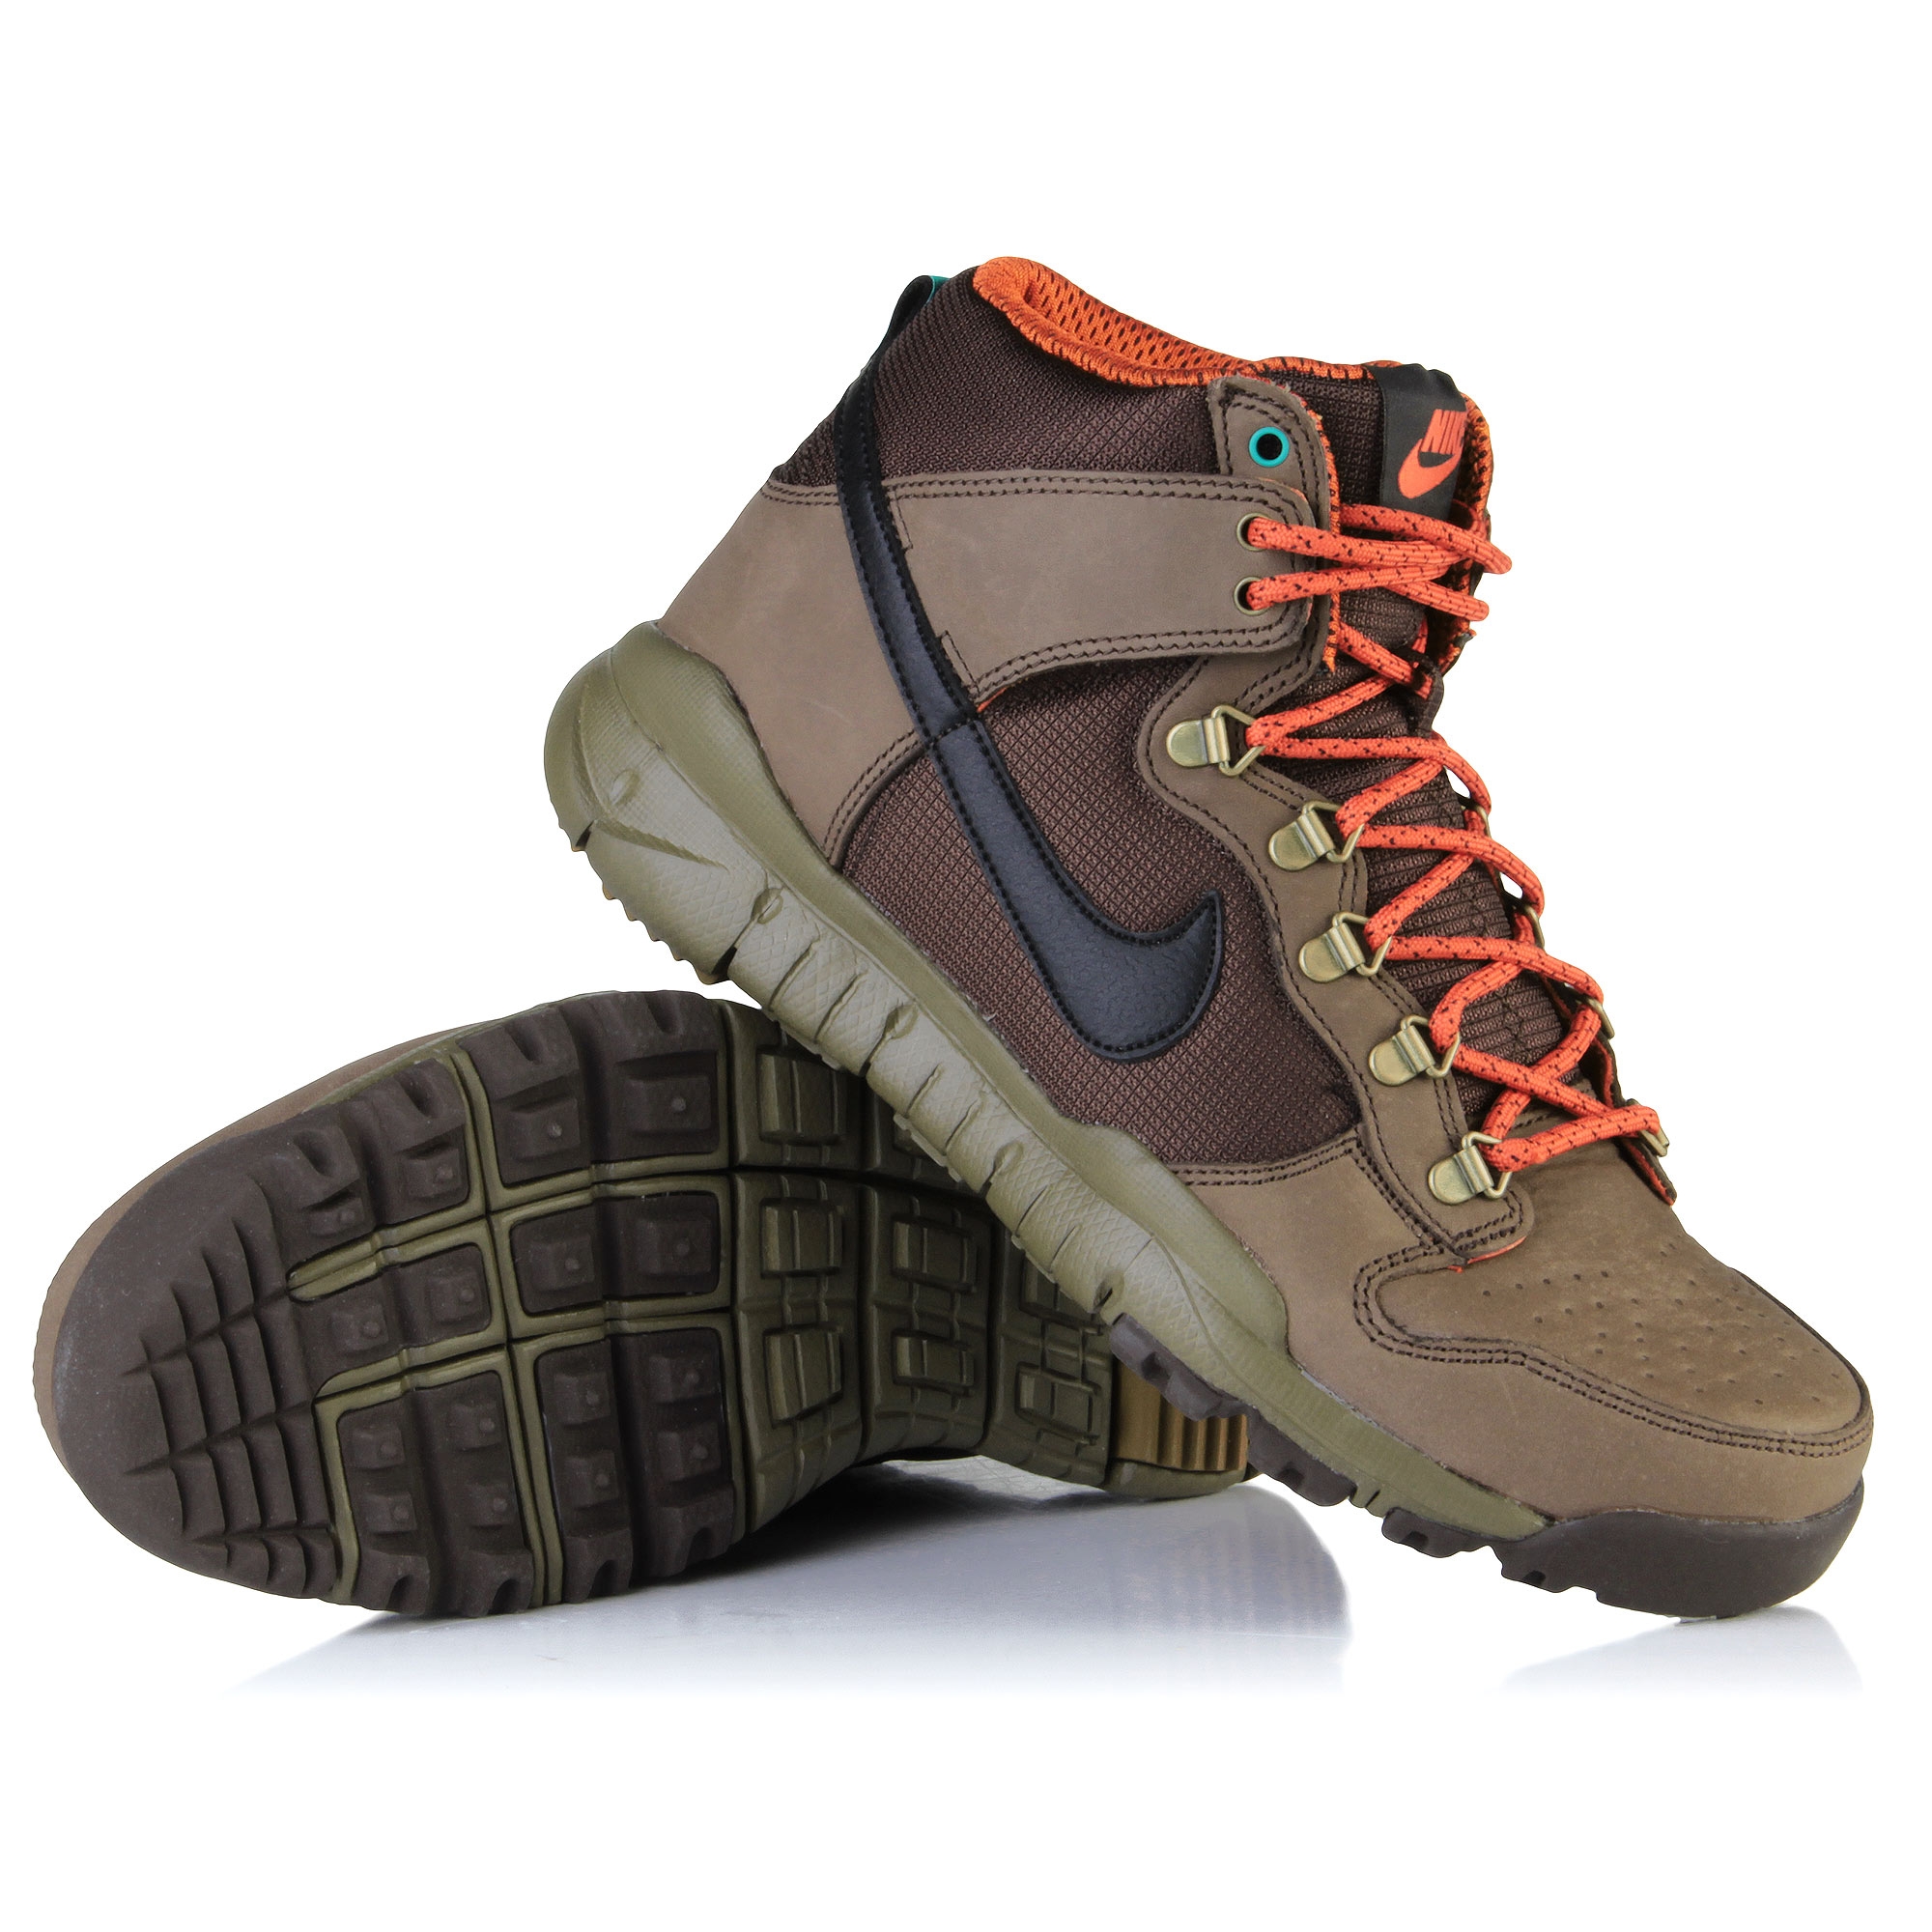 Nike Action Dunk High Oms brq brown/blk 